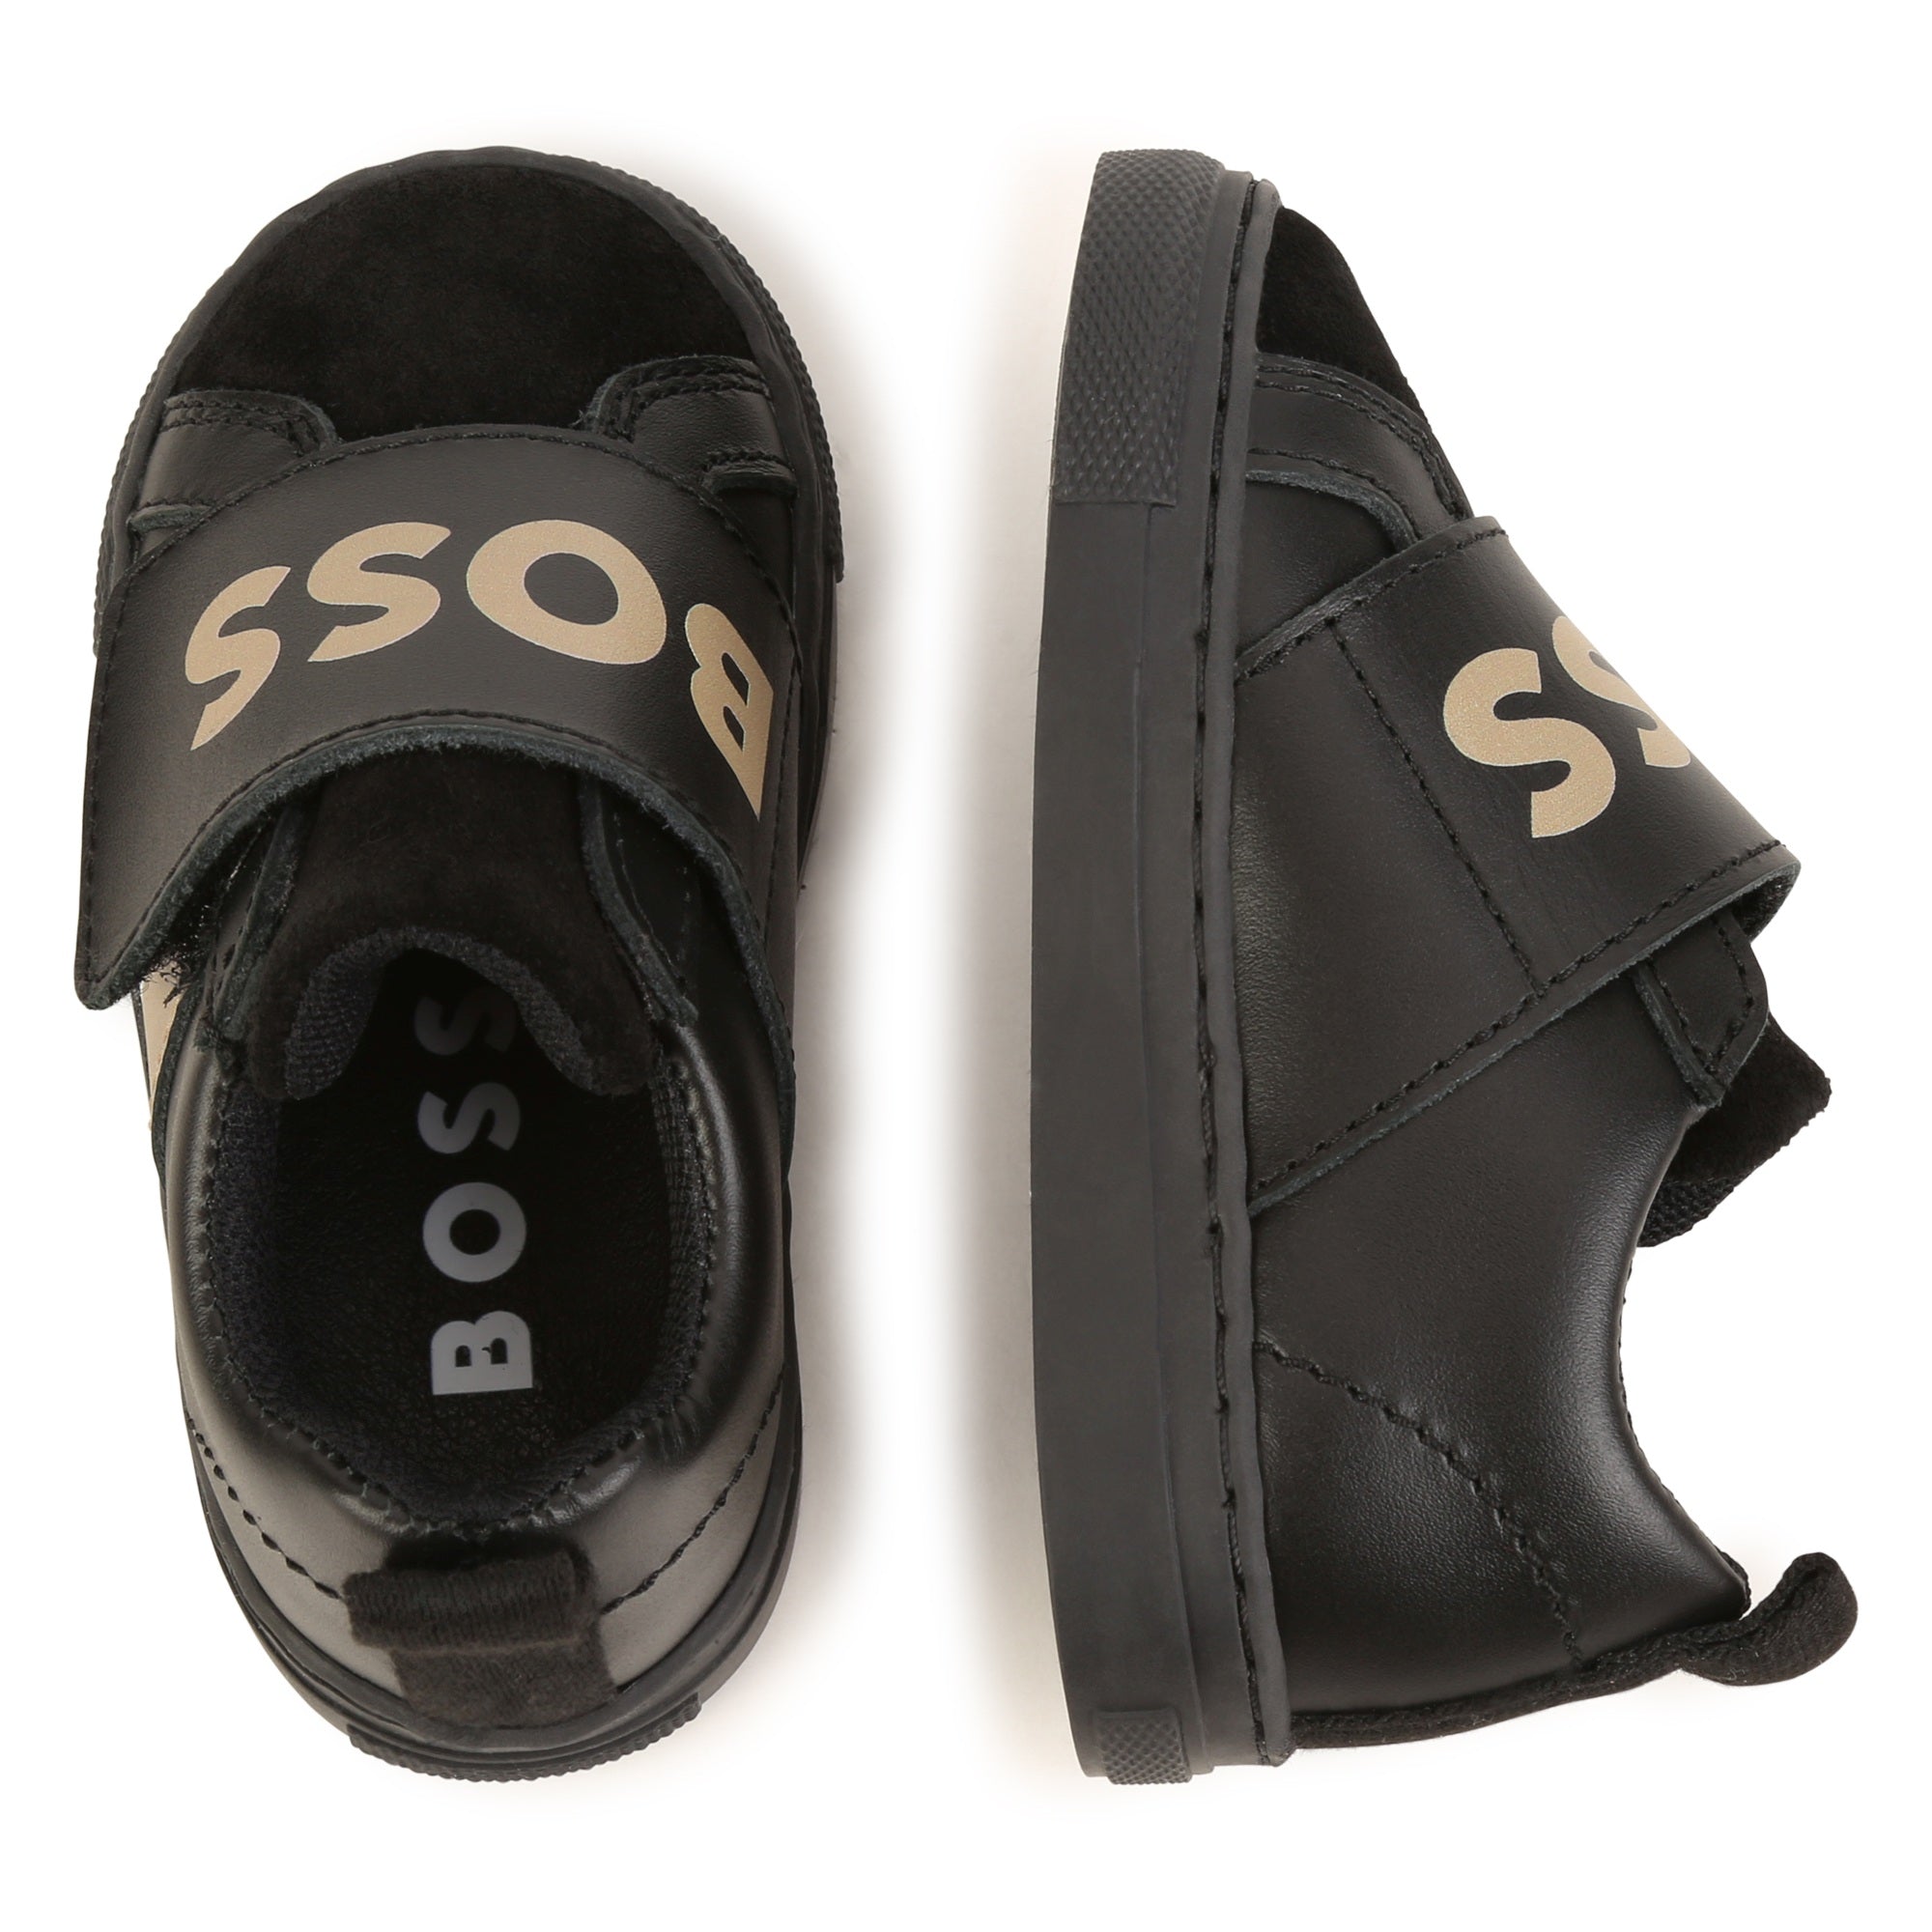 Basket, Sneaker 28 Black 100% Leather - Lining: Outsole: Synthetic